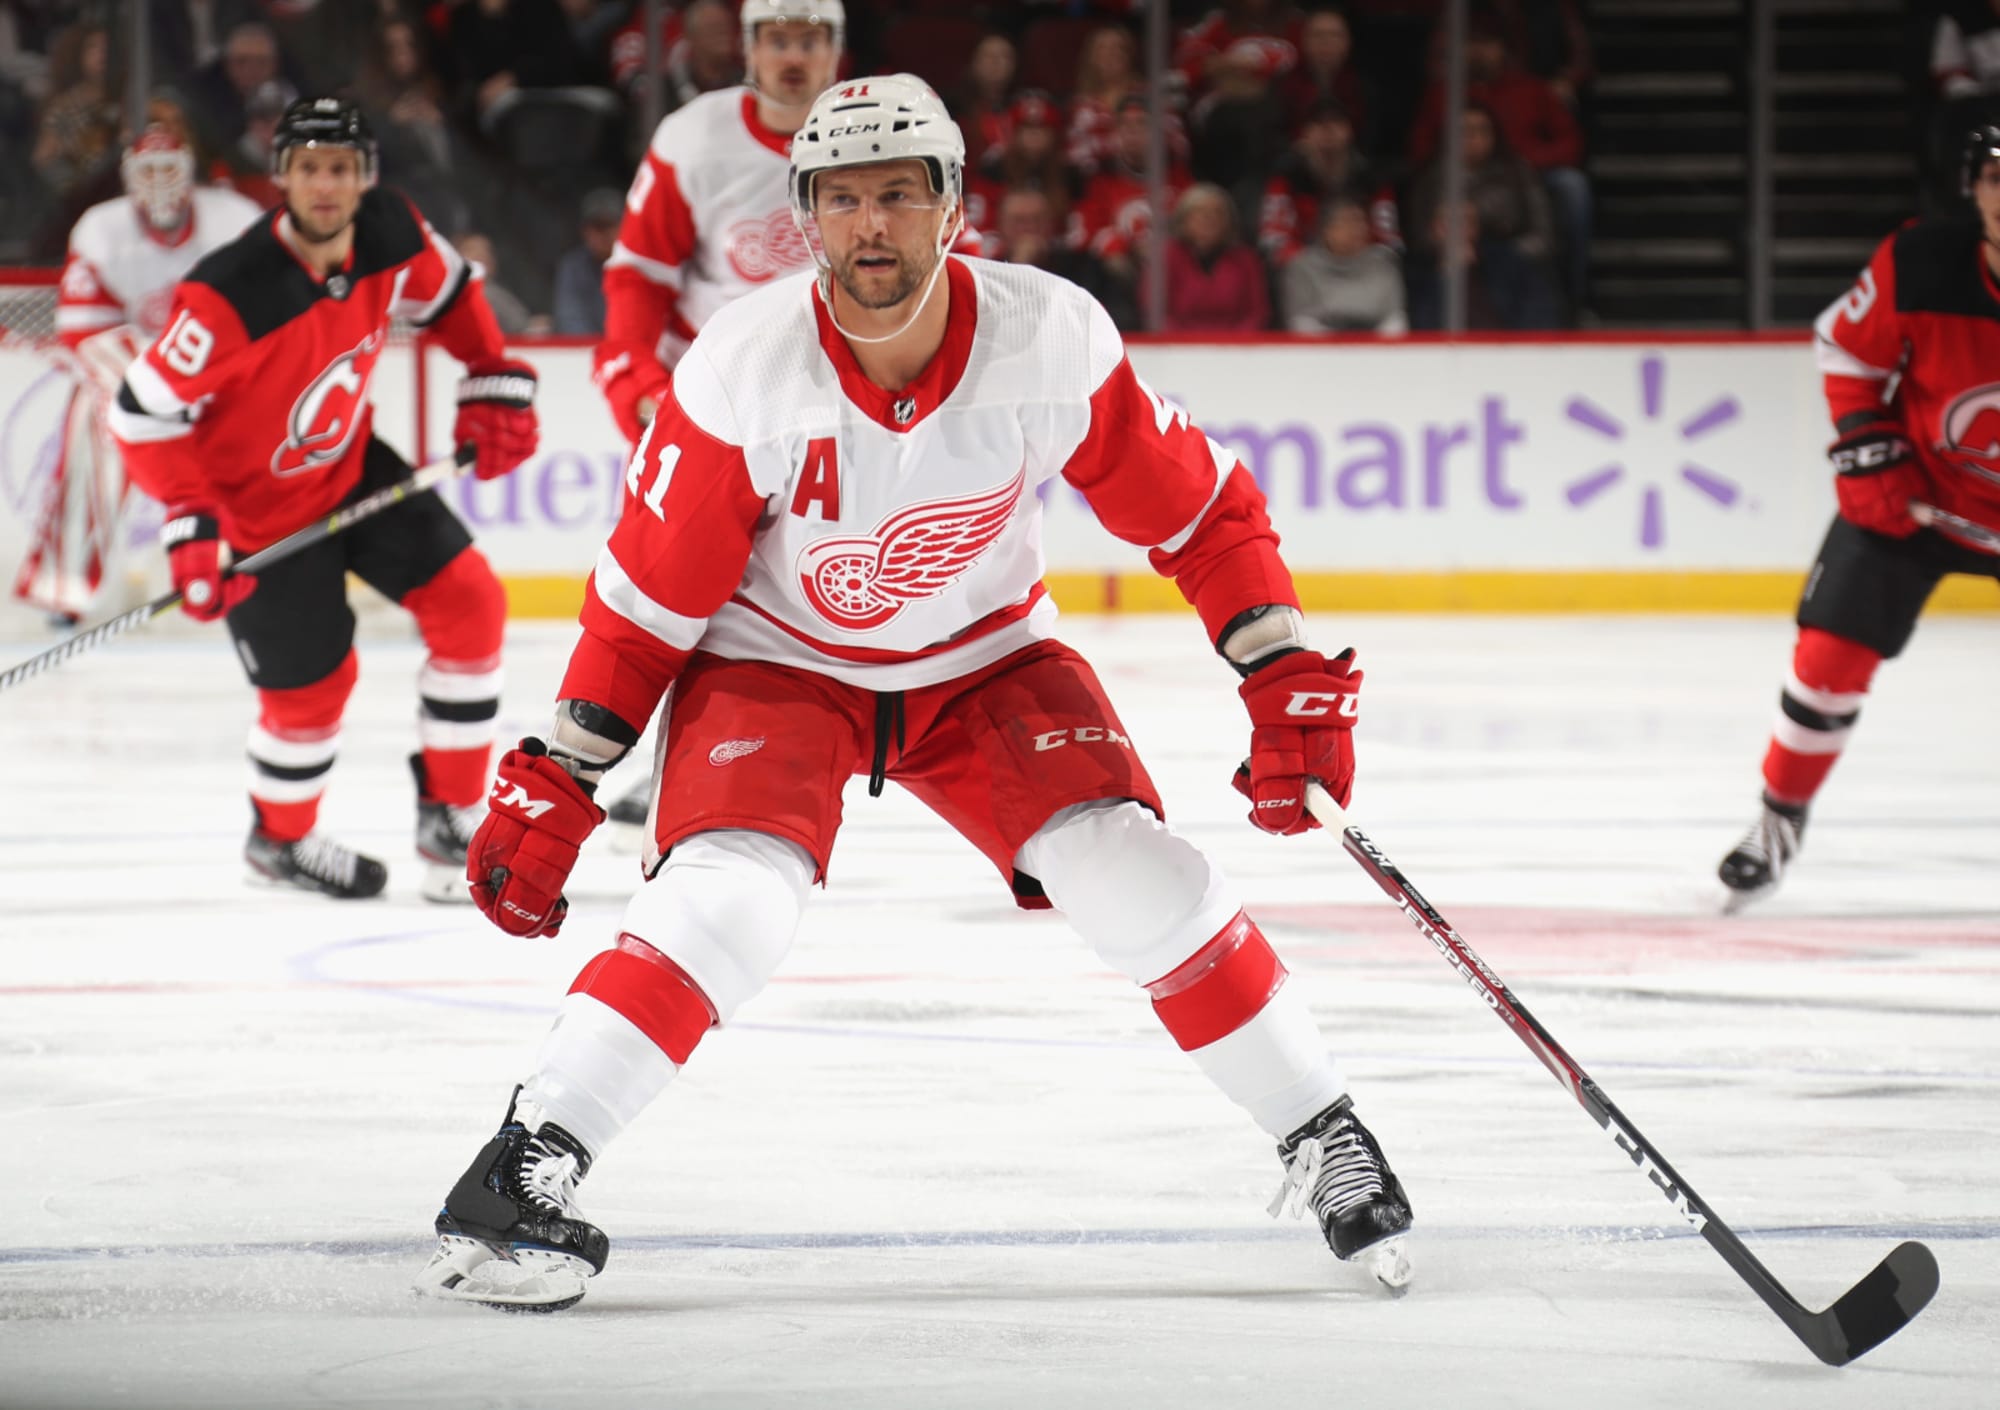 Trade Discussion: Should Detroit trade Marc Staal? - Page 2